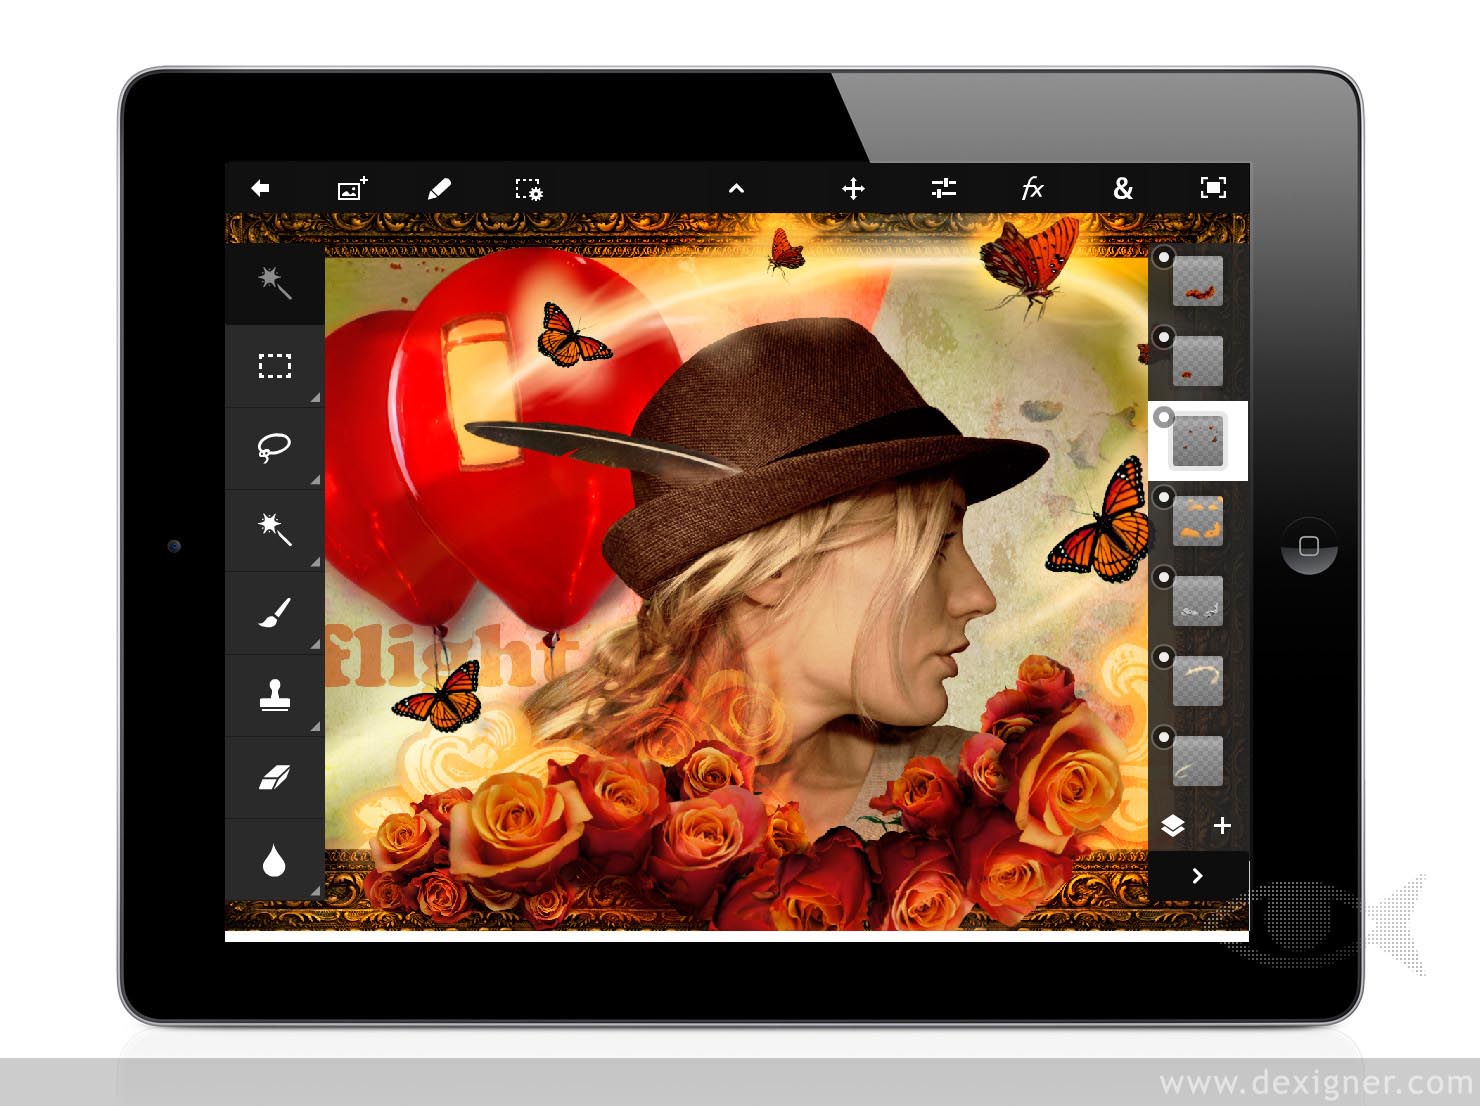 adobe photoshop touch reviews